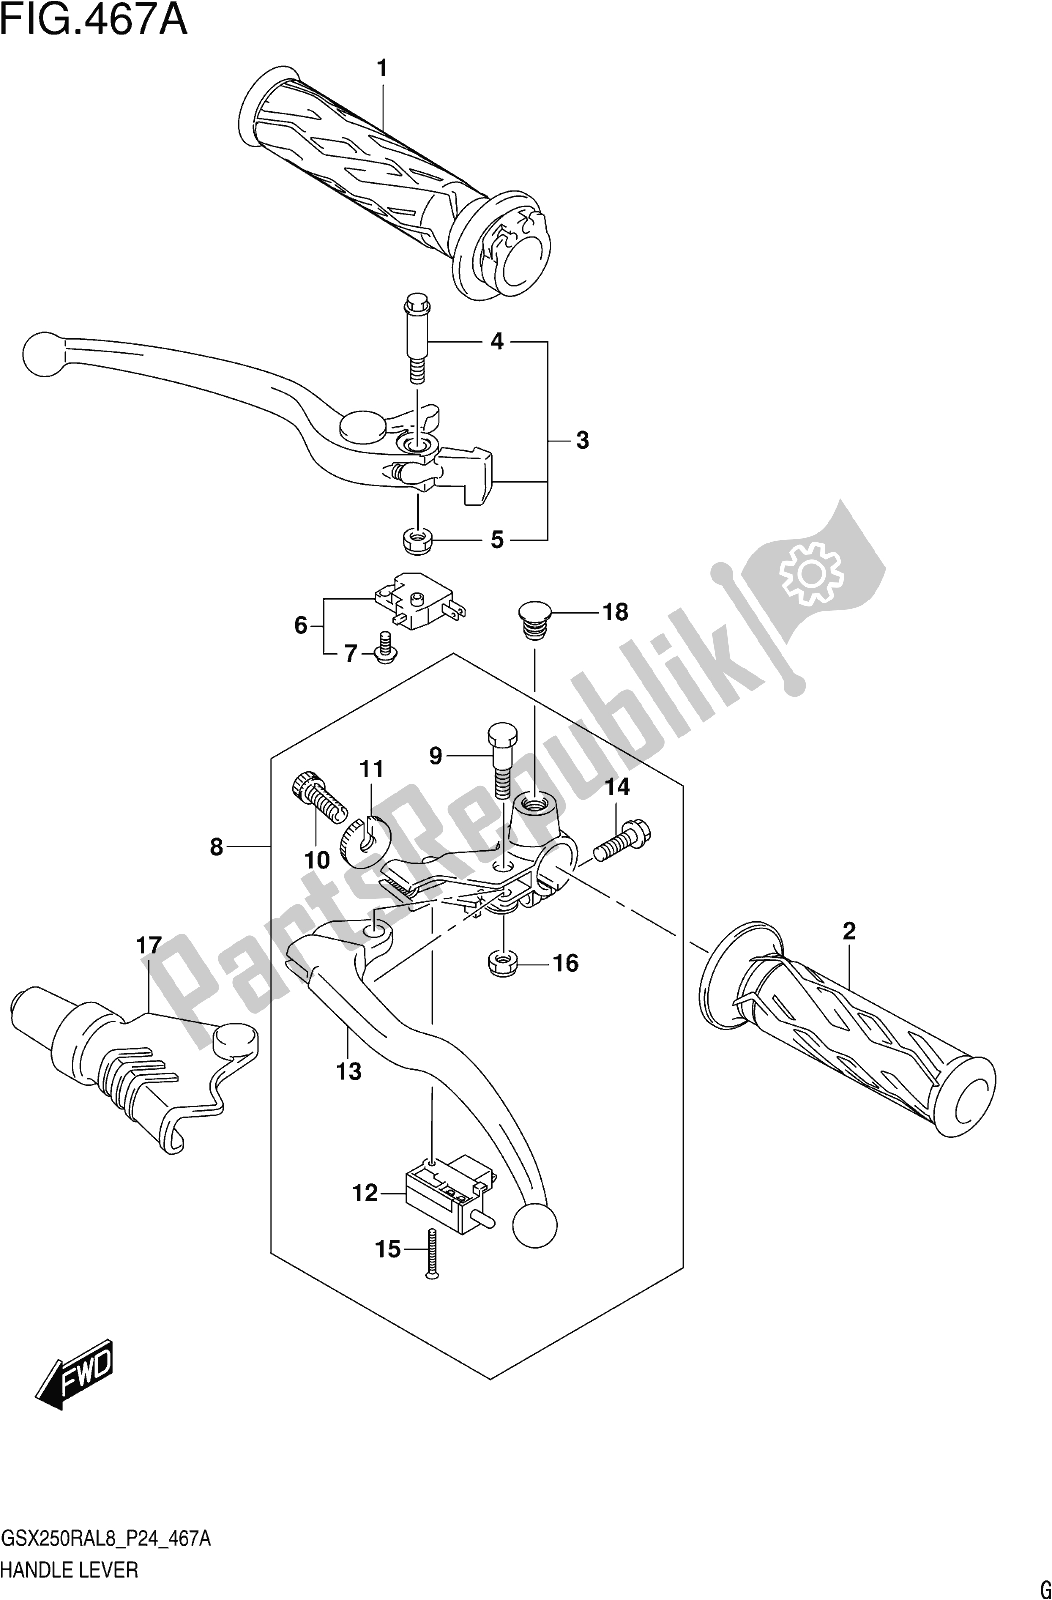 All parts for the Fig. 467a Handle Lever of the Suzuki GW 250 RAZ 2018